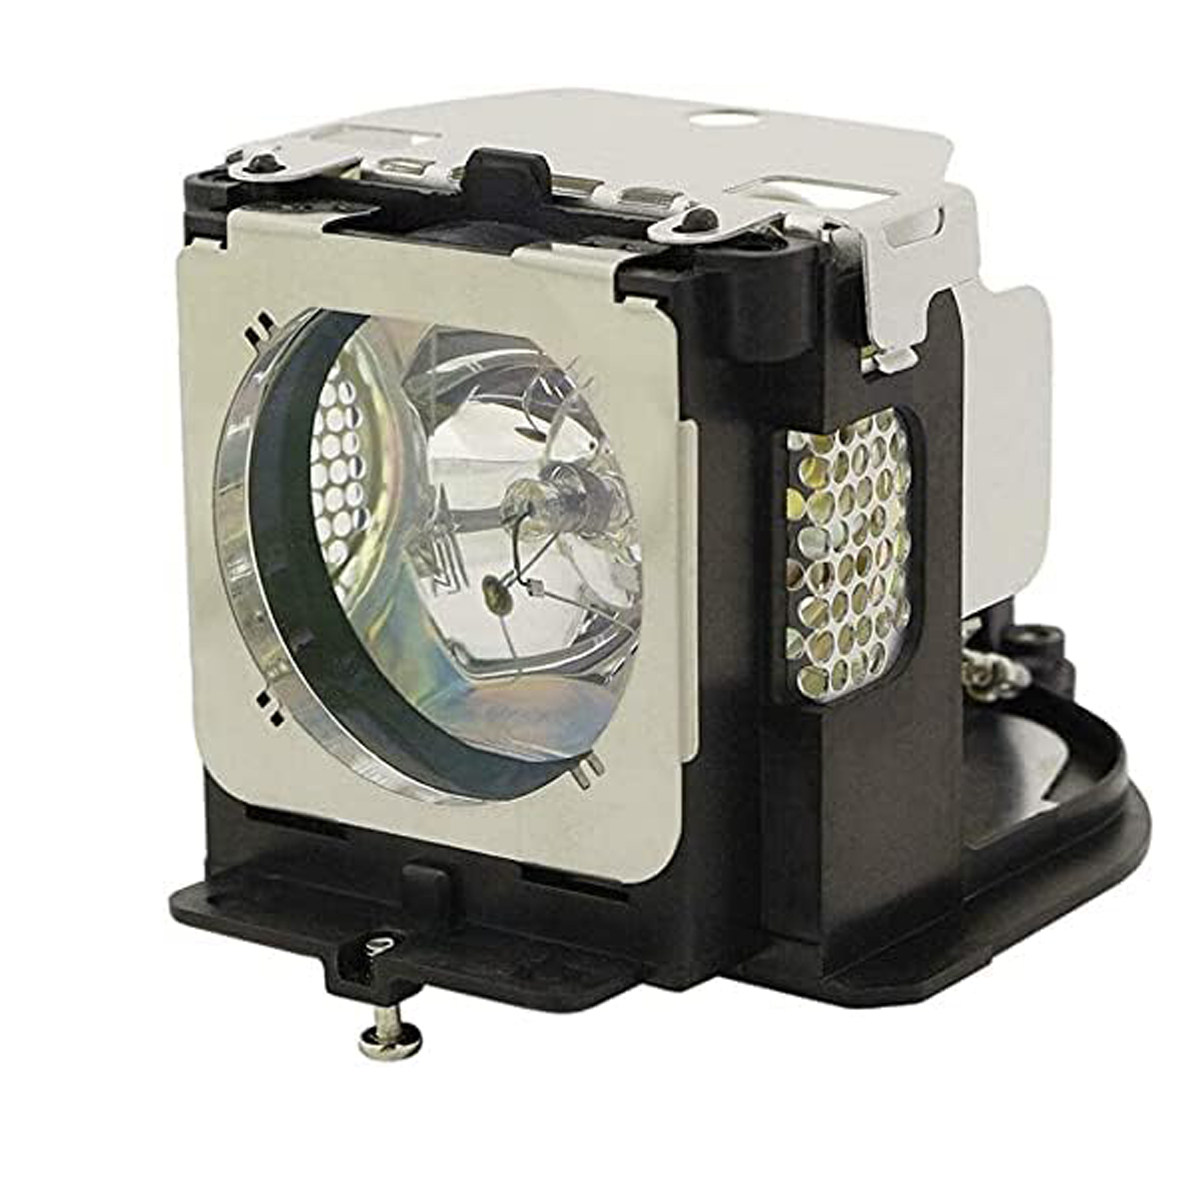 Replacement Projector lamp POA-LMP139 For Sanyo PLC-XE50A PLC-XL 50A